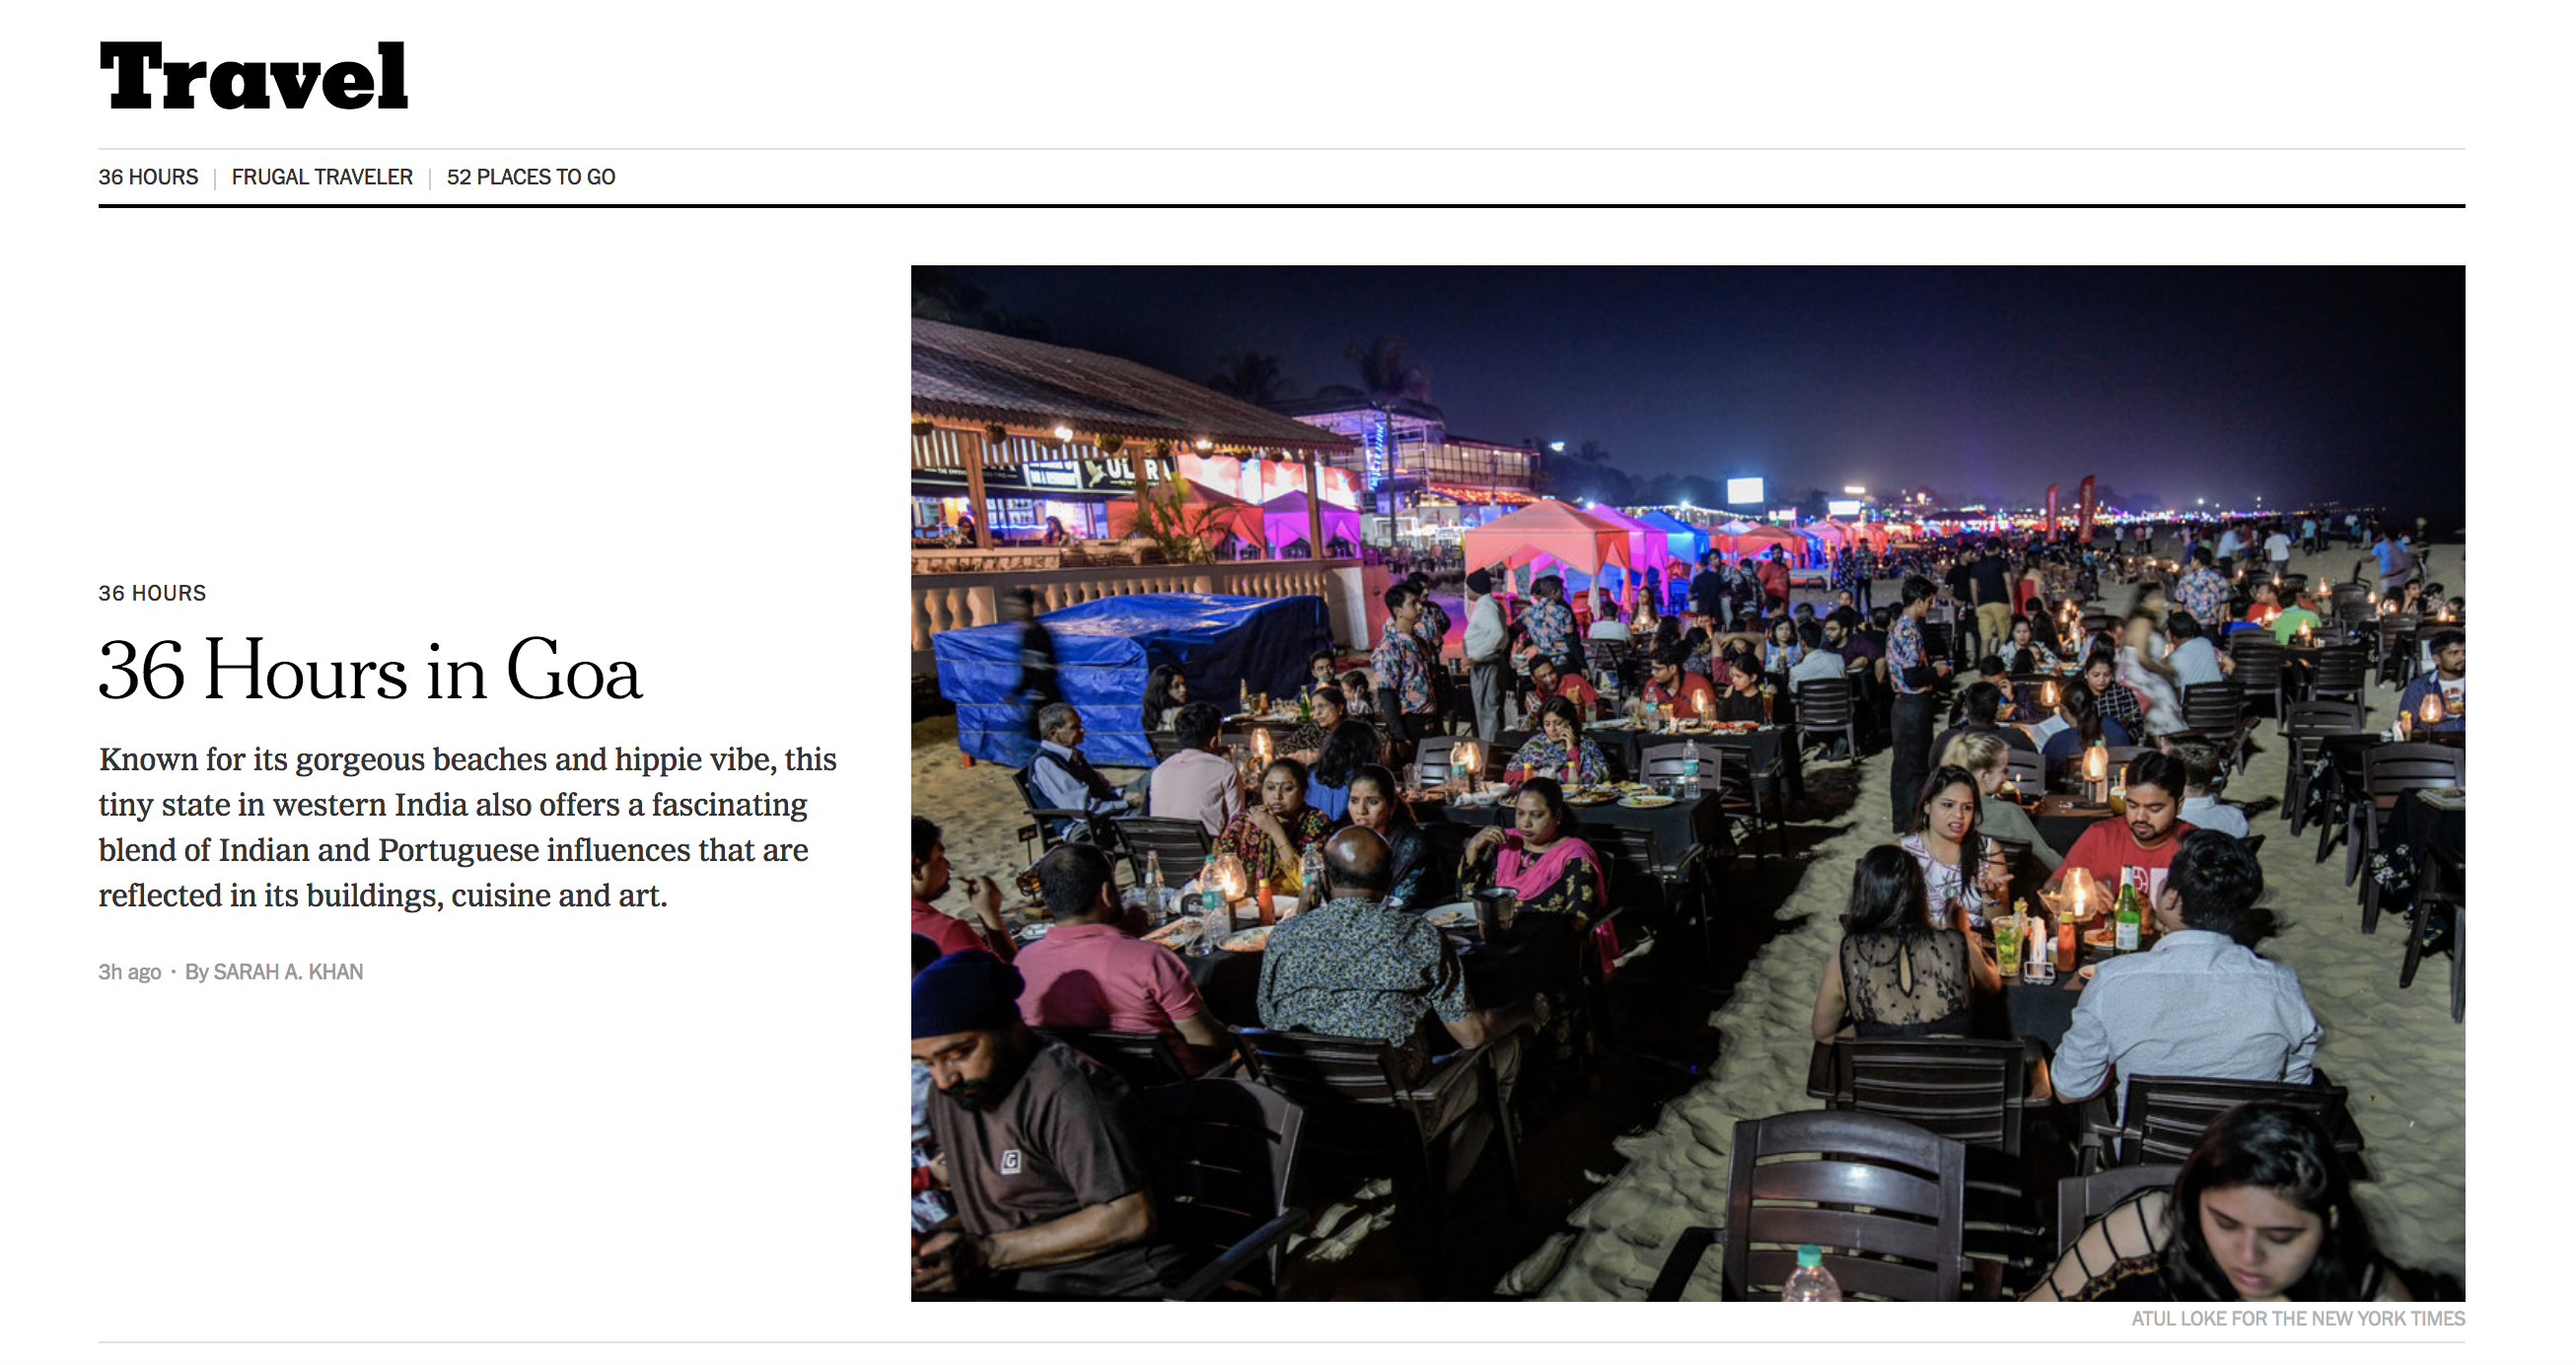 New York Times: 36 Hours in Goa